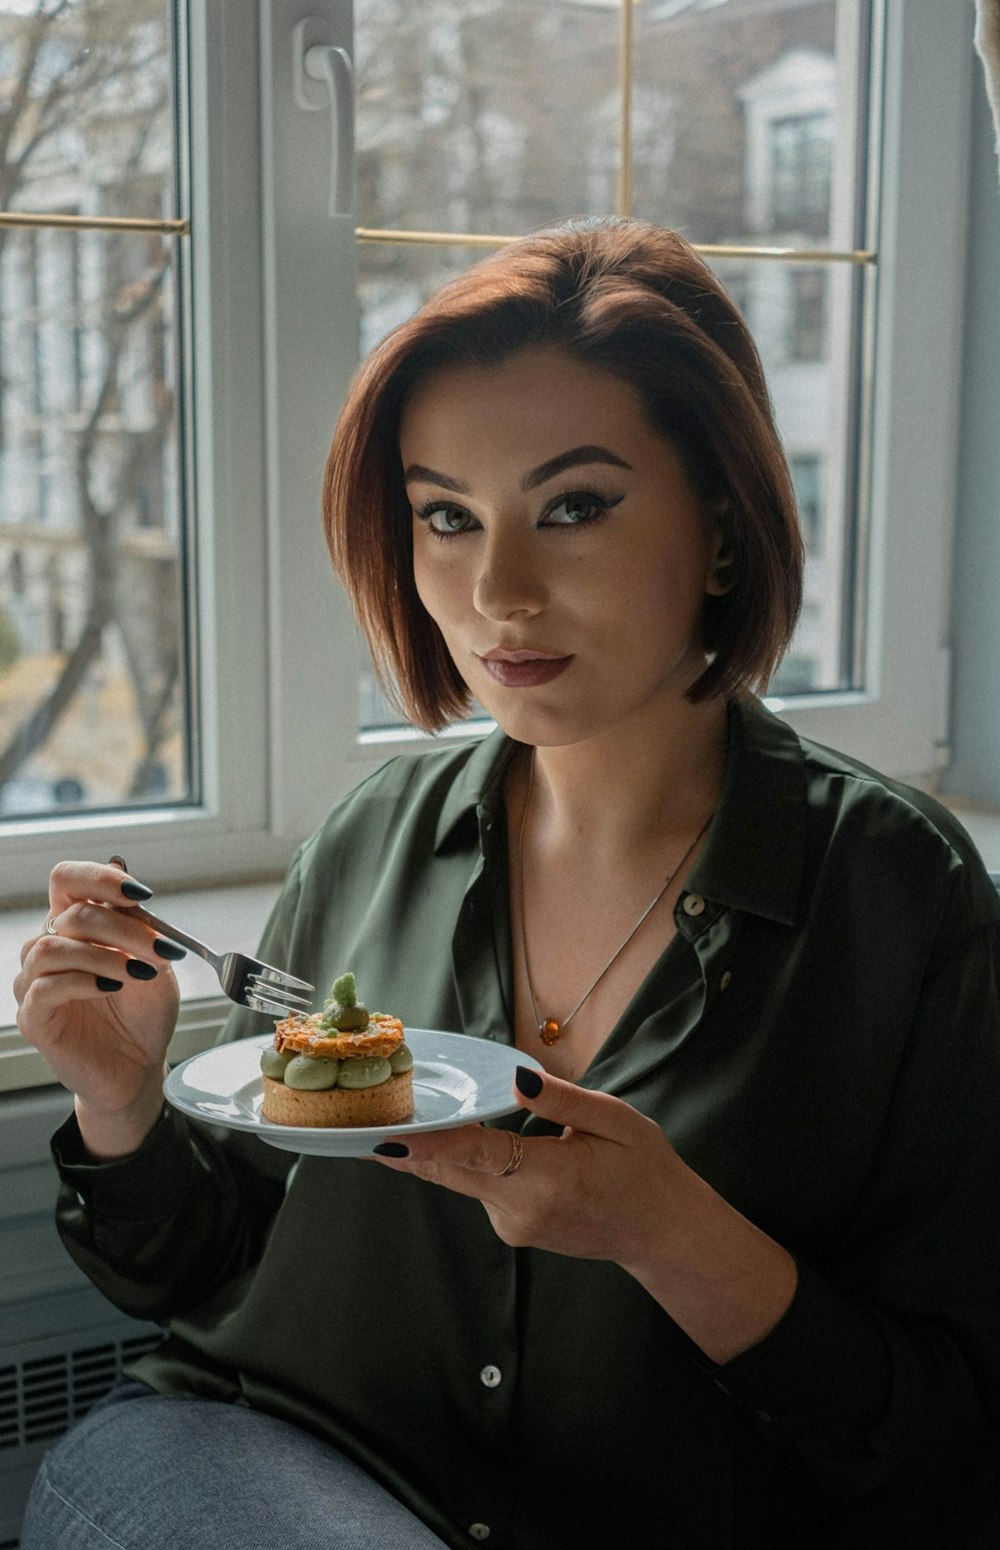 a woman holding a plate of food in front of a window